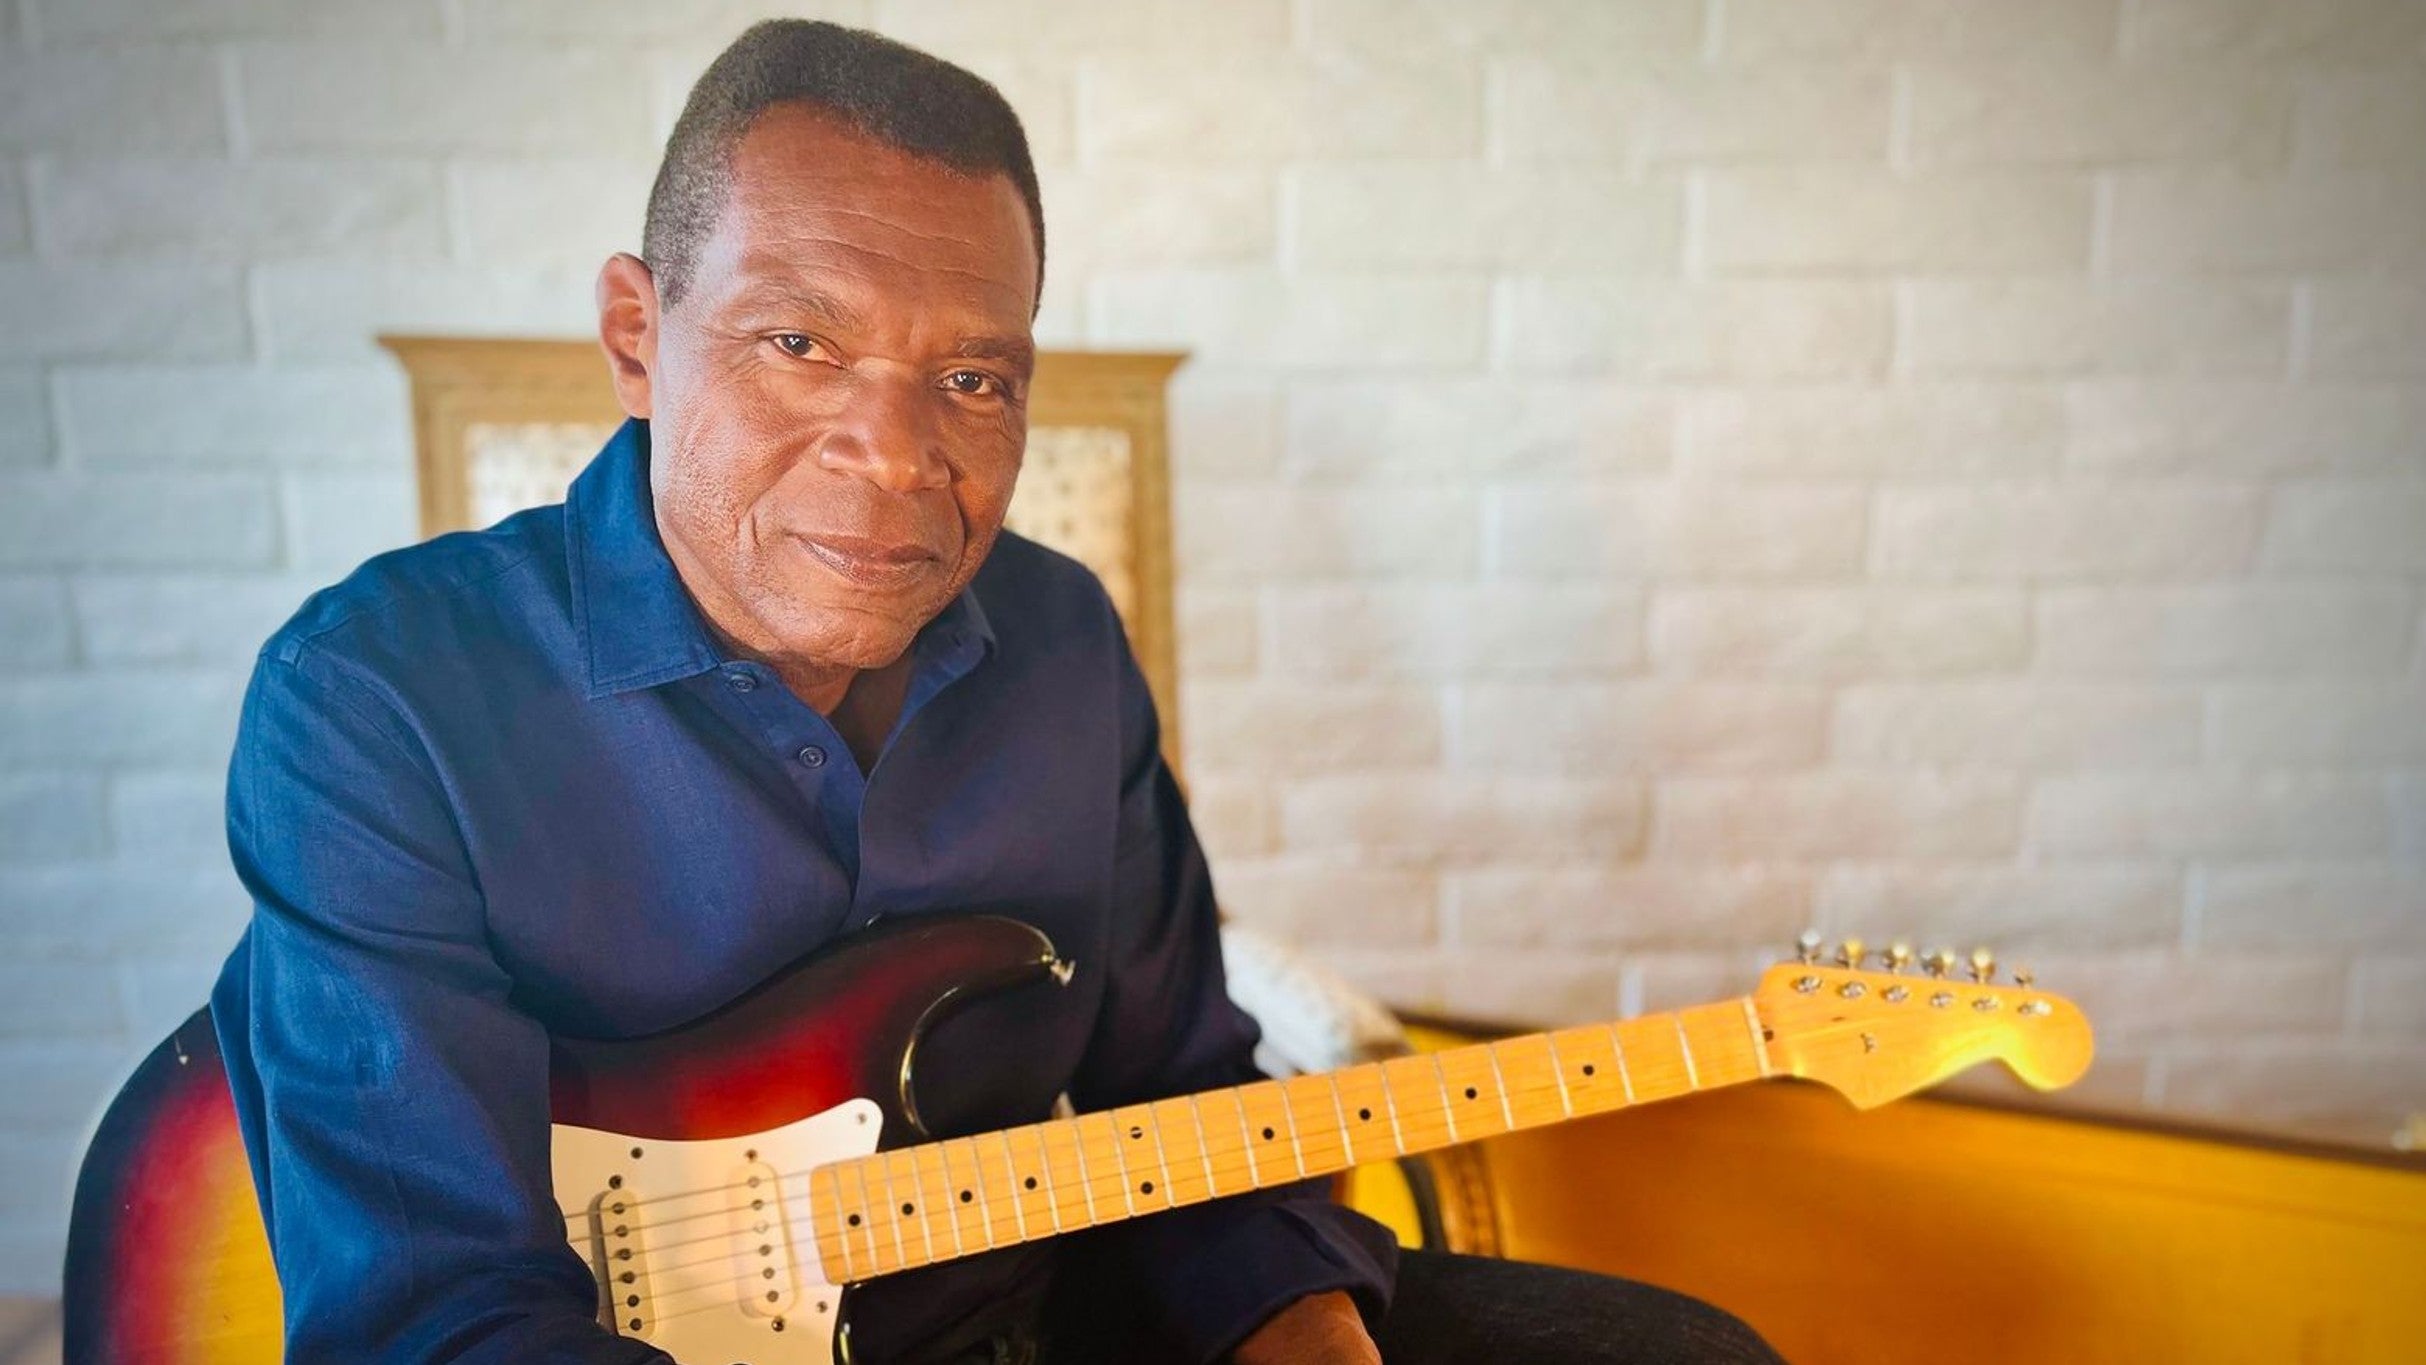 members only presale code for Robert Cray Band presale tickets in Bloomington at Bloomington Center for the Performing Arts